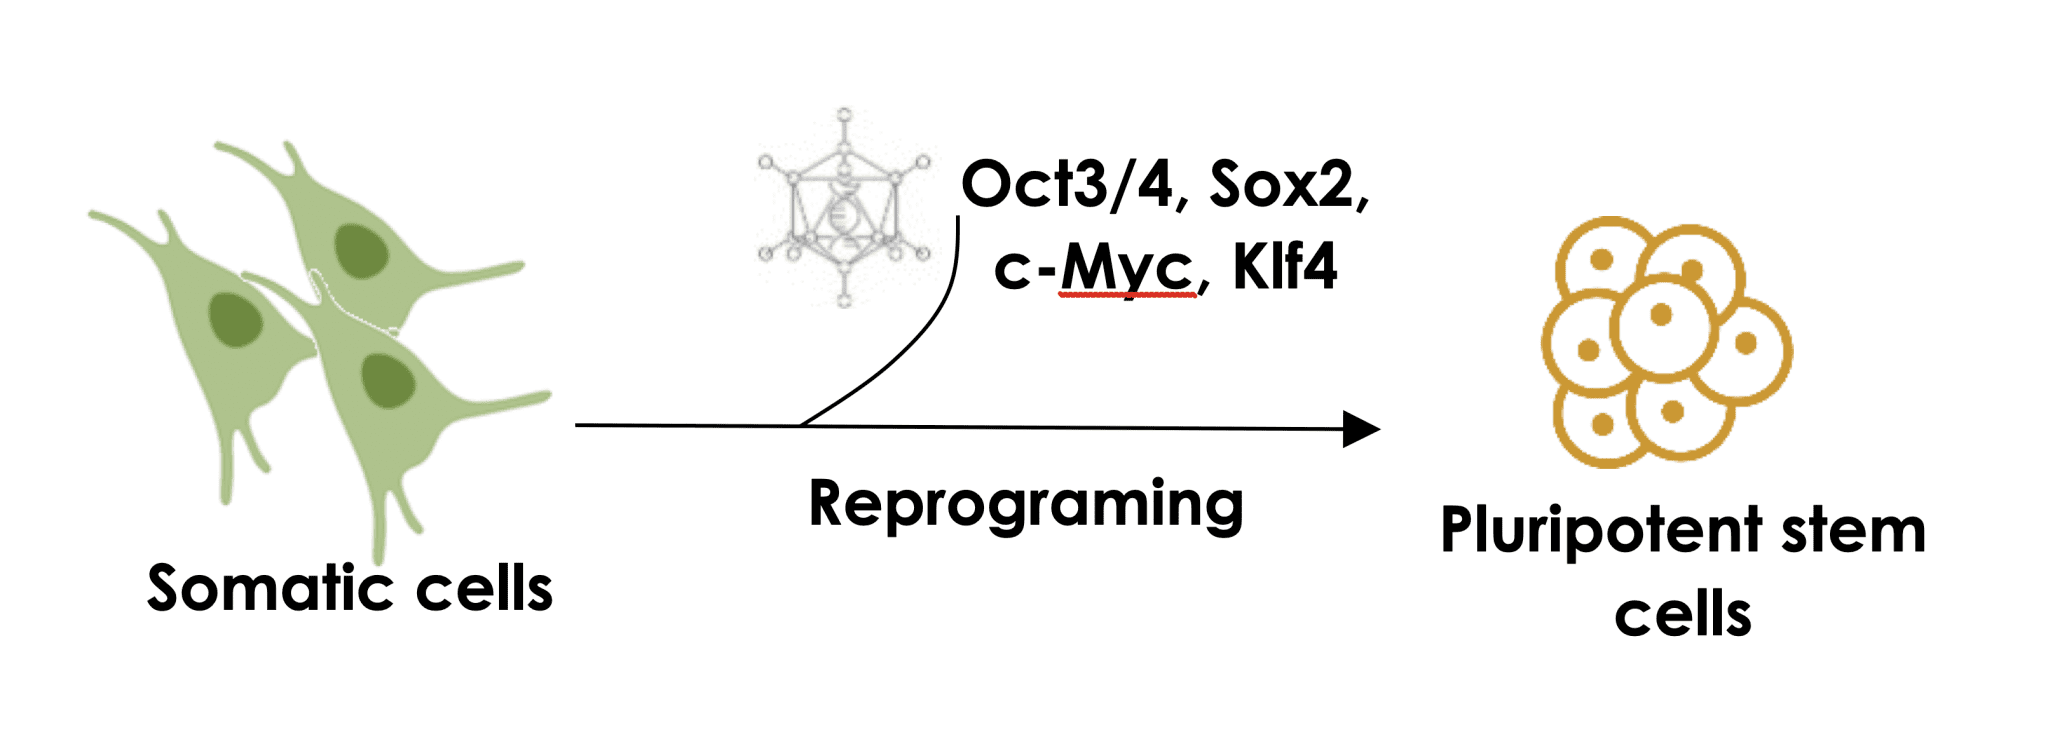 Reprograming somatic cells into pluripotent stem cells by introducing the reprograming factors.